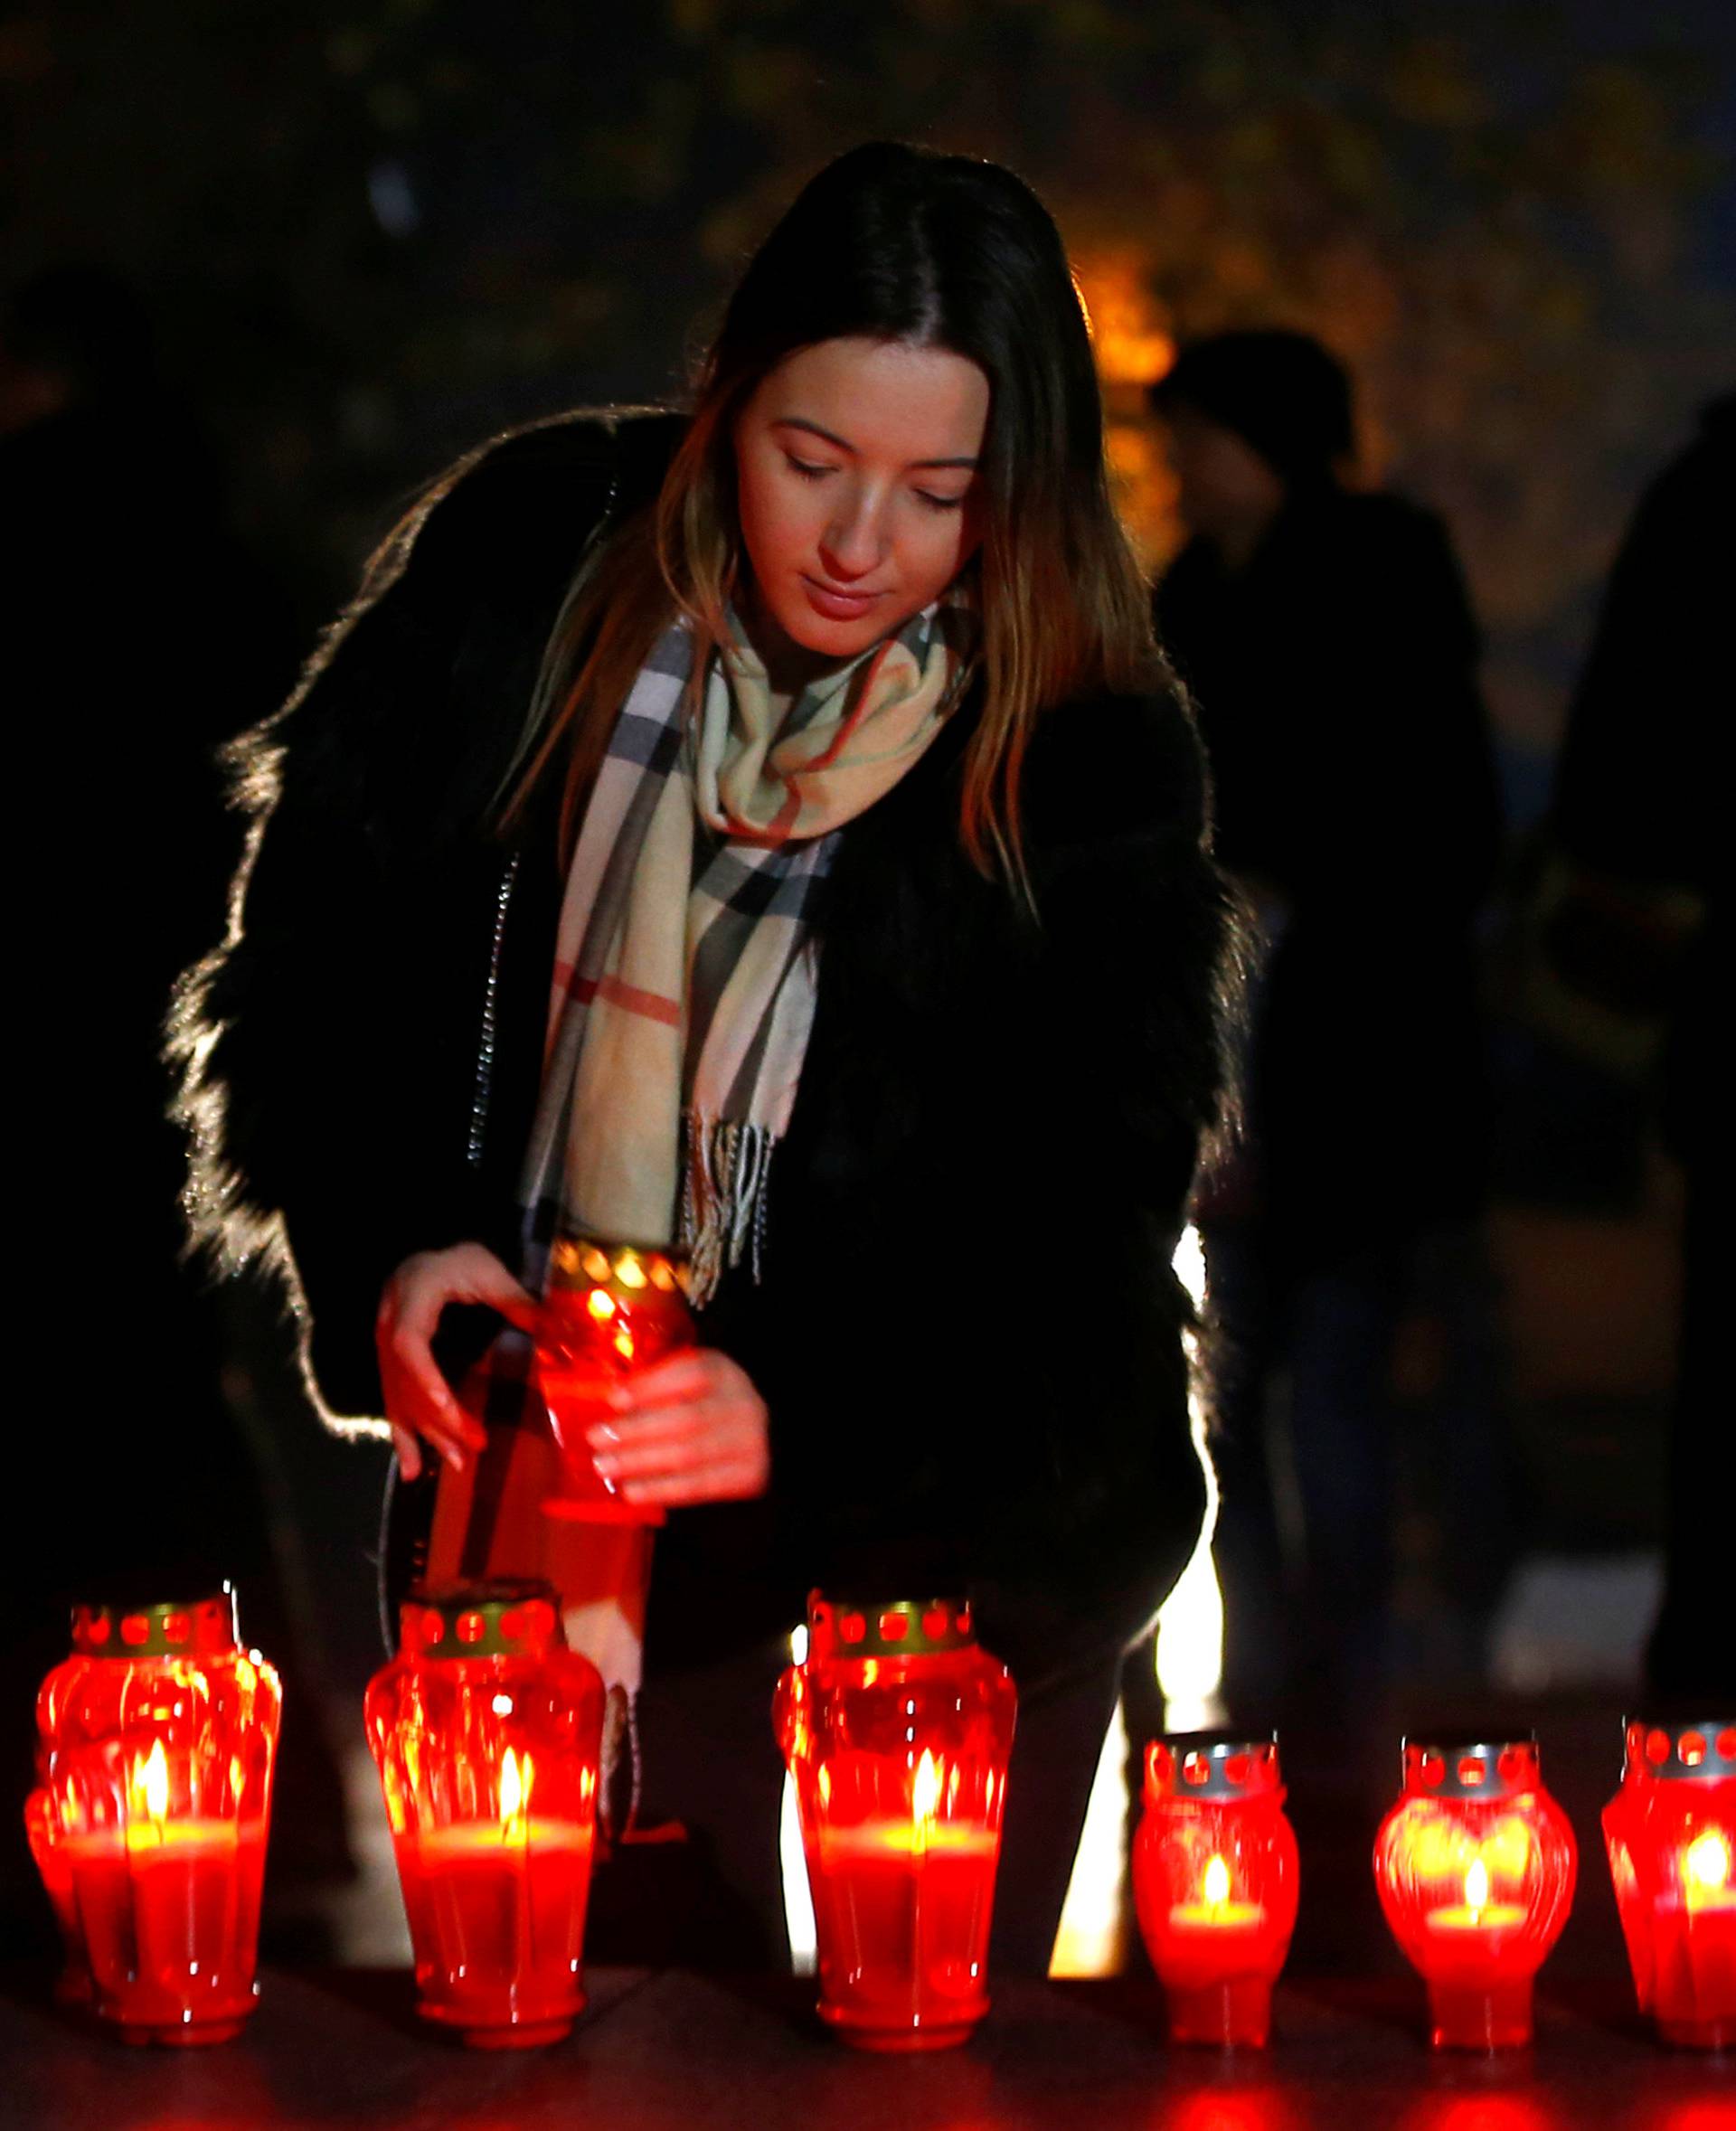 A Bosnian Croat woman lights a candle for the convicted general Slobodan Praljak, who killed himself seconds after the verdict in the U.N. war crimes tribunal in The Hague, in Mostar